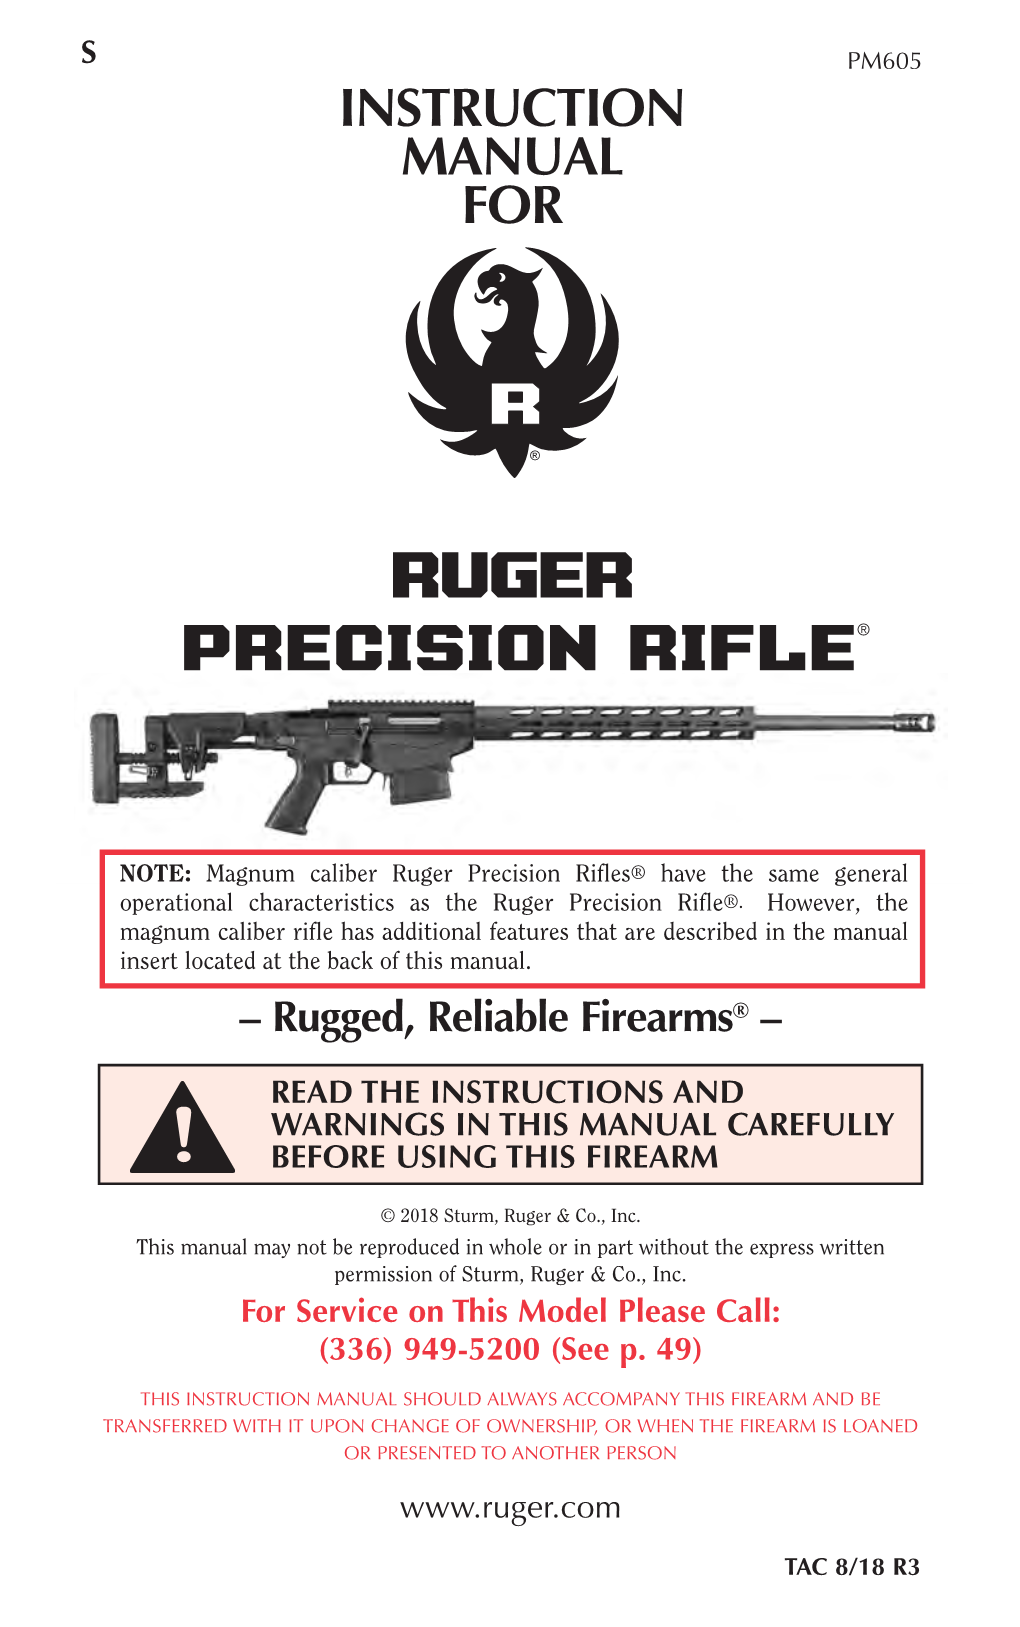 Ruger Precision Rifle®